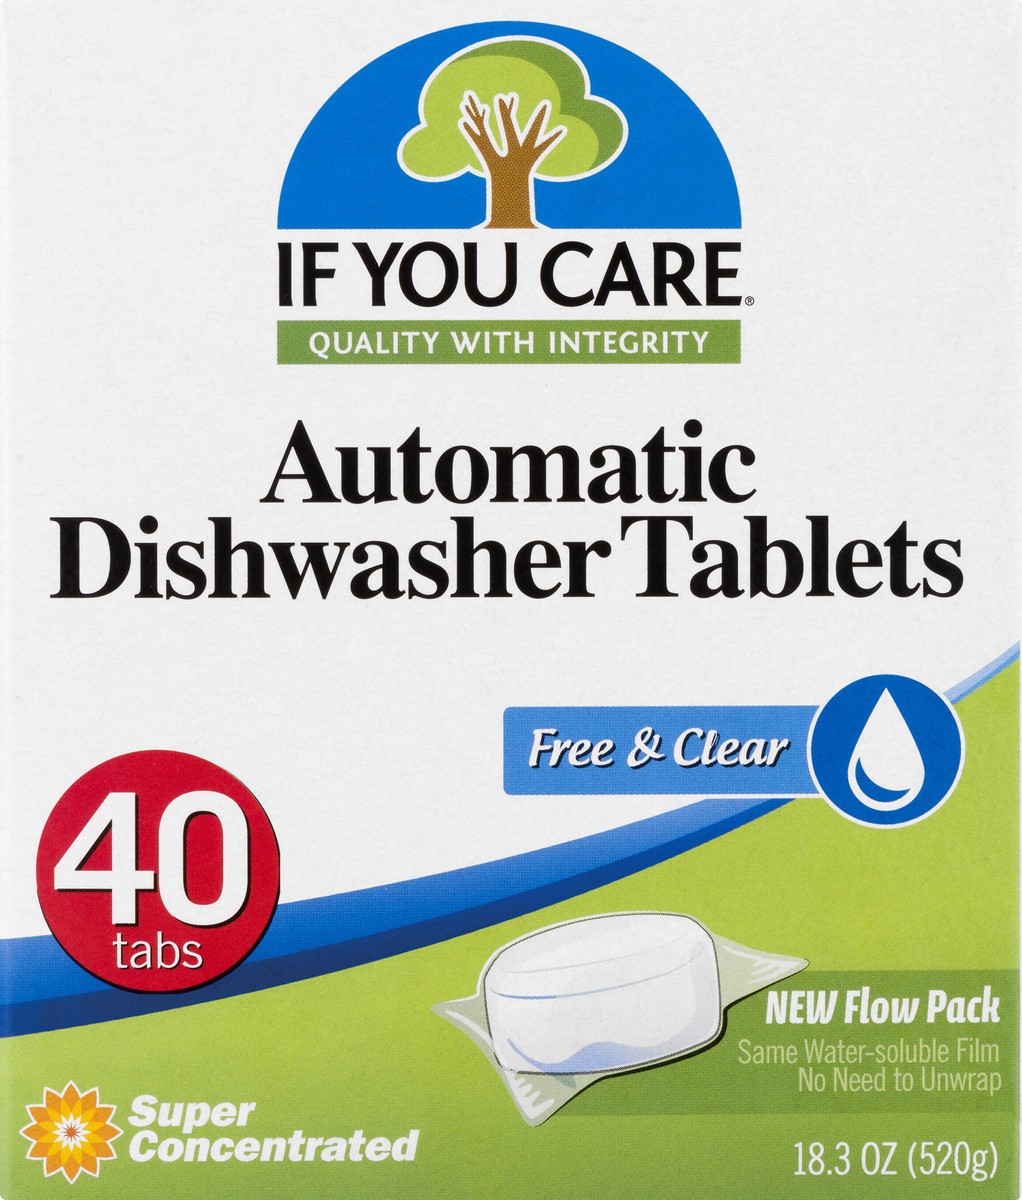 slide 6 of 9, If You Care Source Atlantique, Inc If You Care Dishwasher Tablets, Automatic, Super Concentrated, Free & Clear 40Ct, 18.3 oz